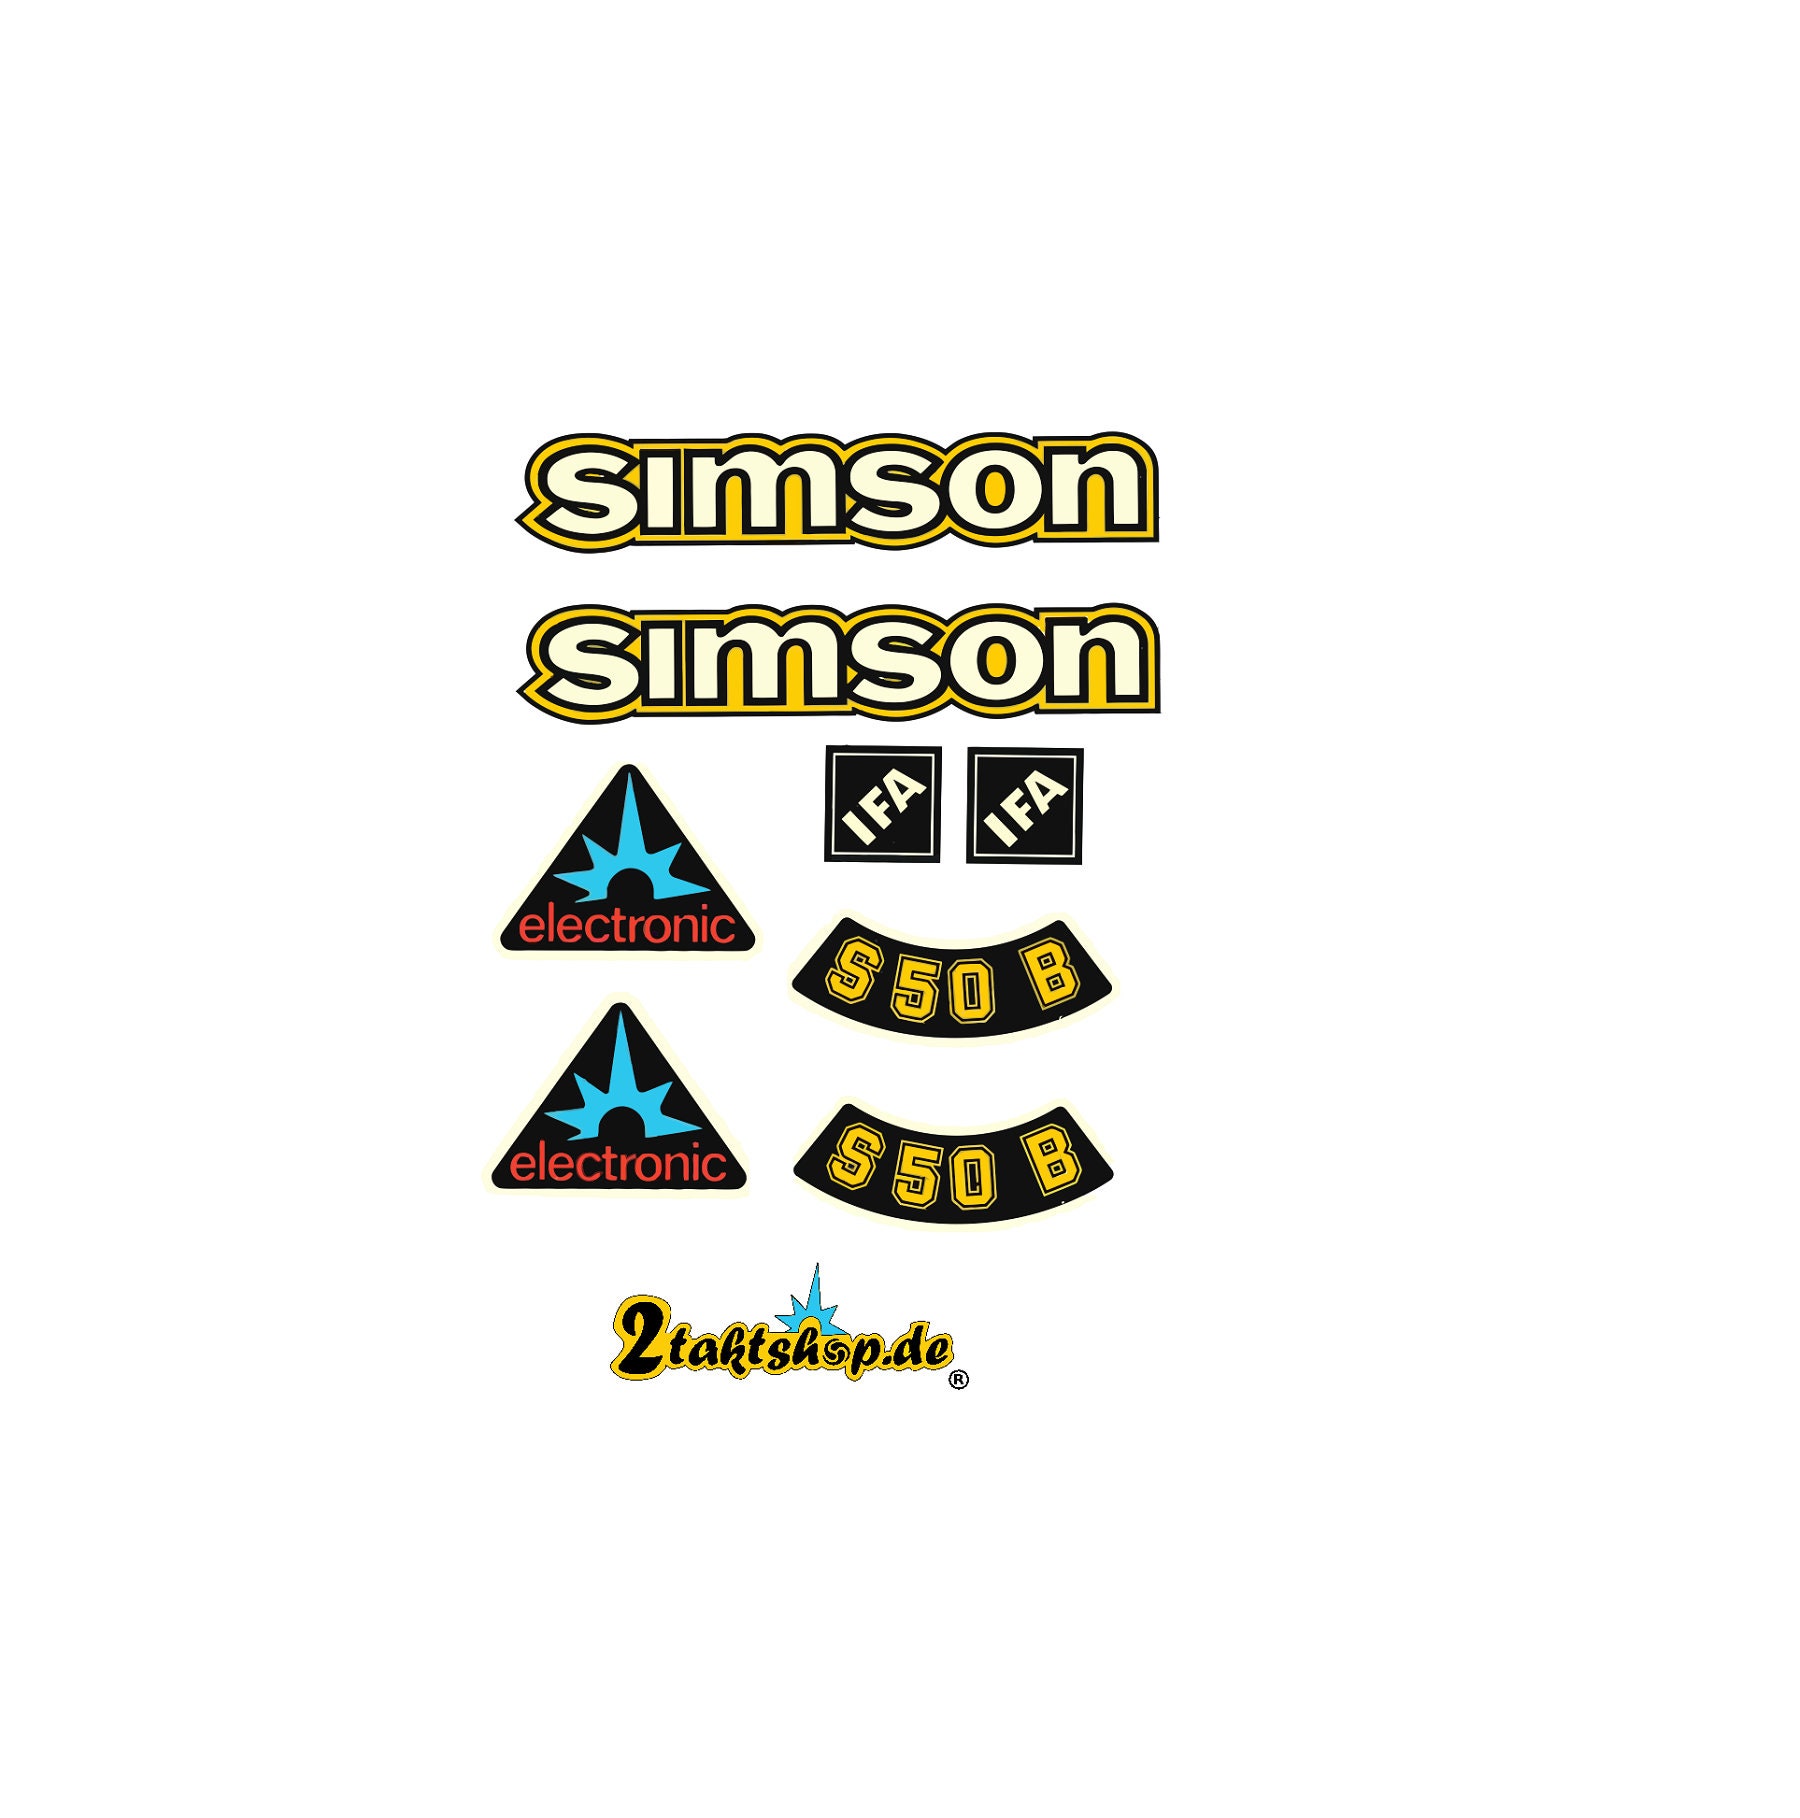 Set of stickers Simson S51 B white/black for tank and side cover